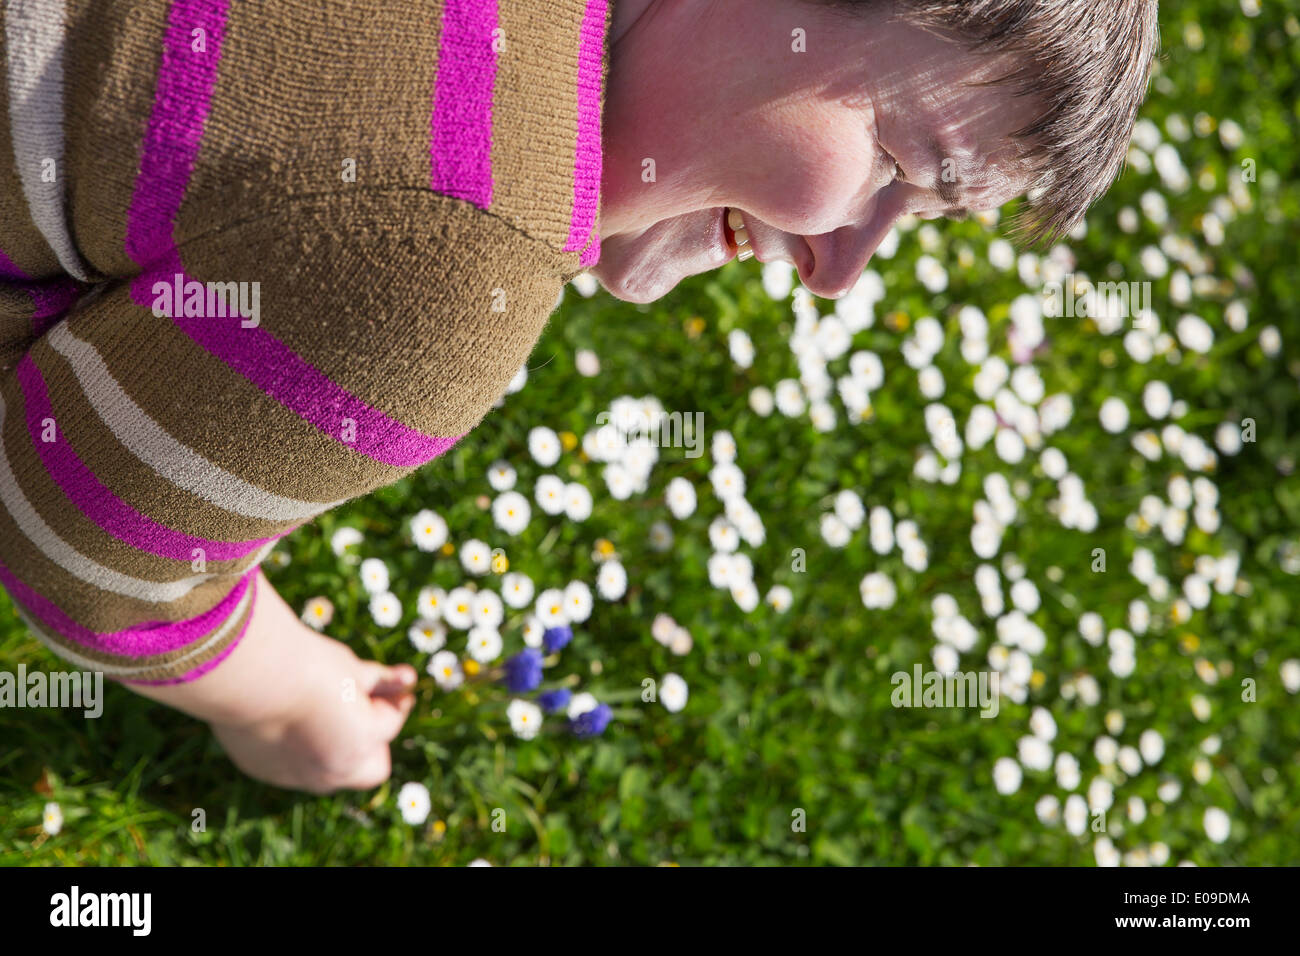 mentally disabled woman on a lawn Stock Photo